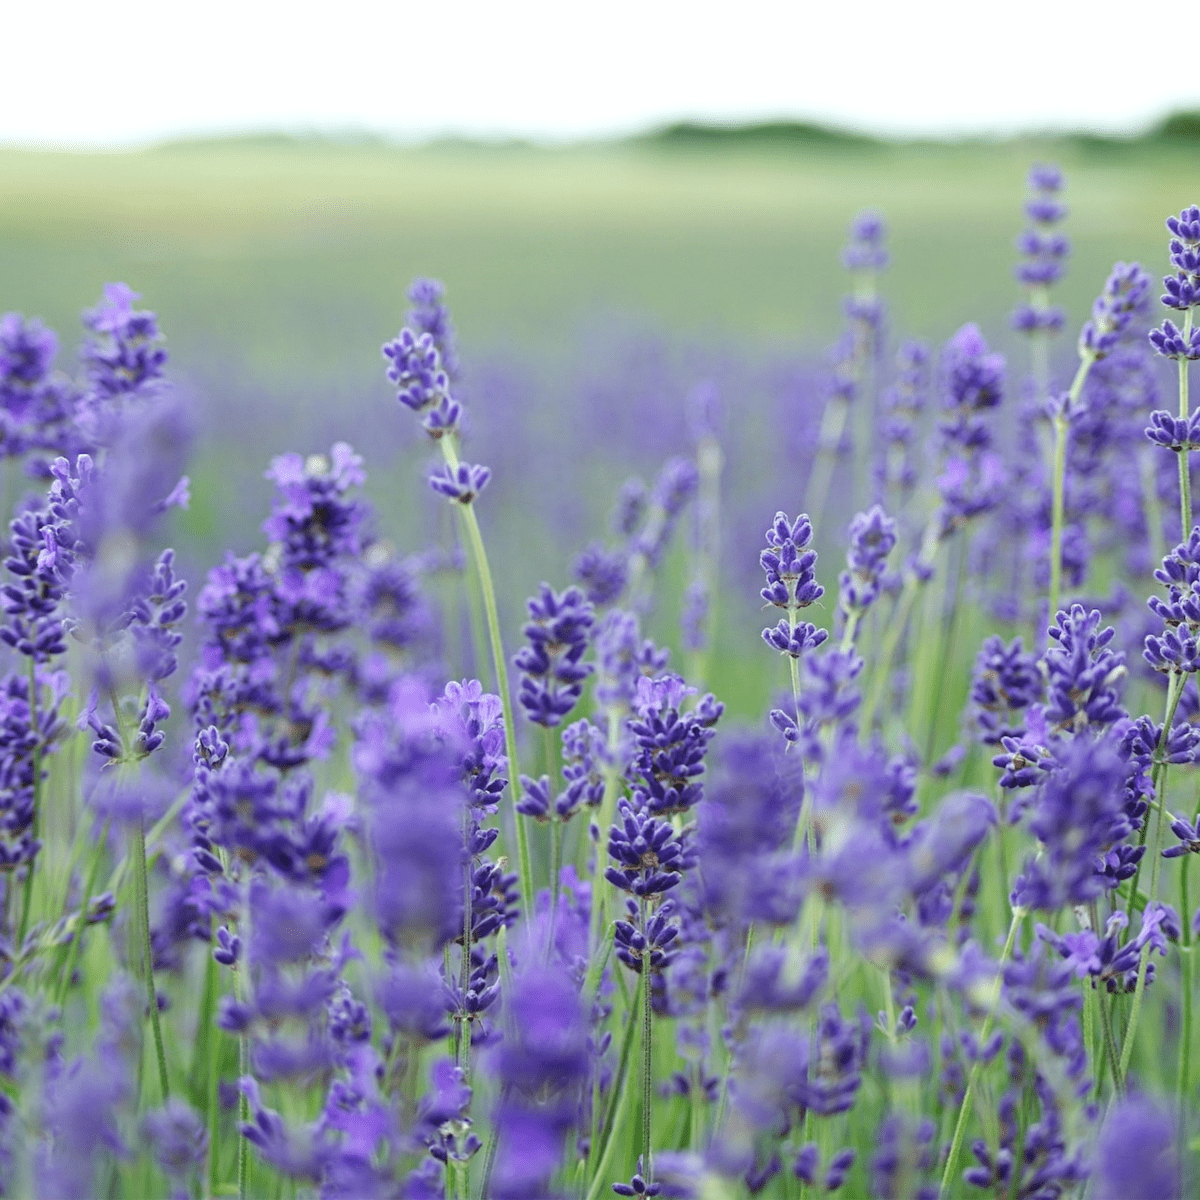 How to Dry Lavender Flowers at Home - Dengarden